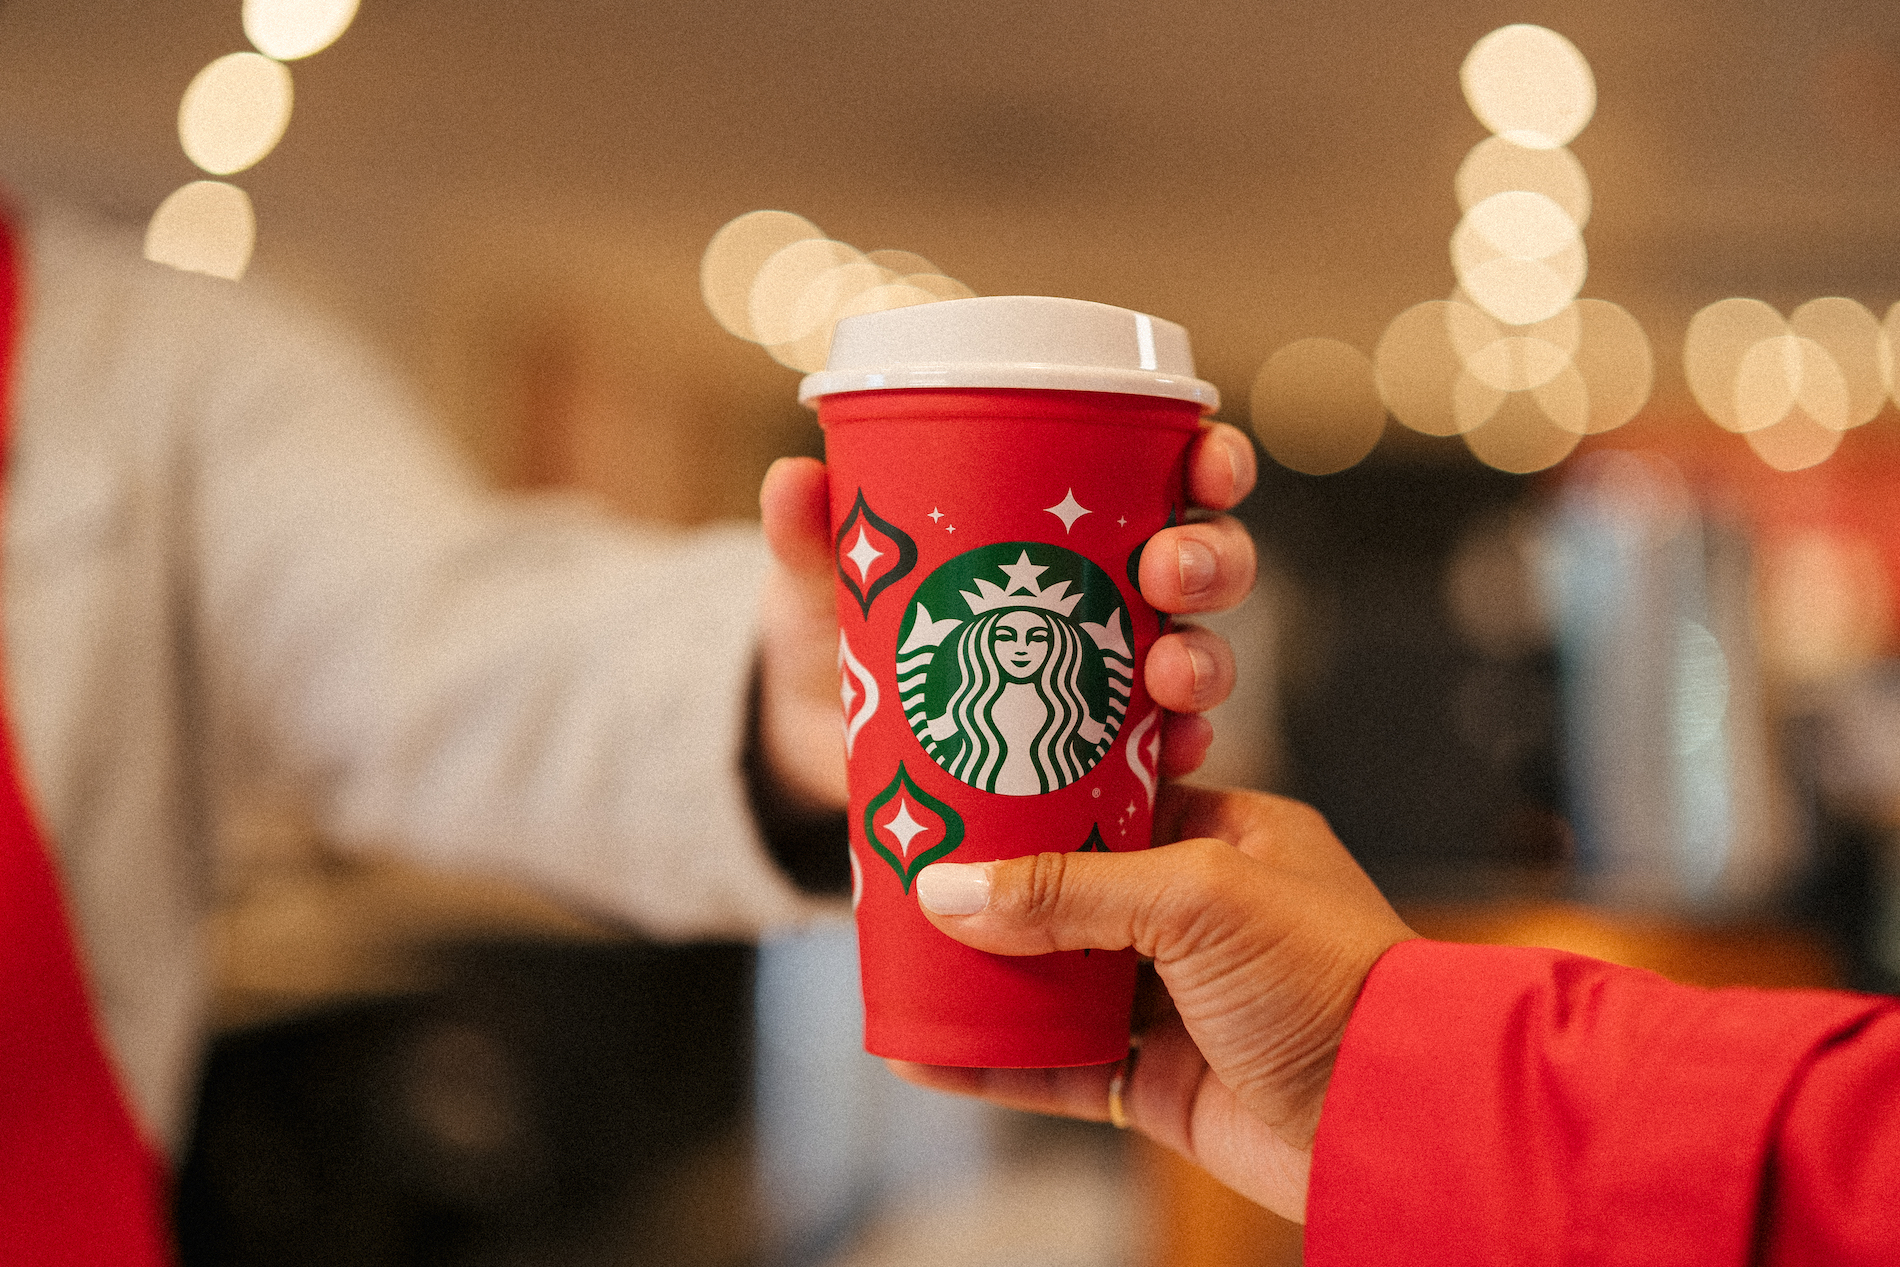 Nov. 16 is Red Cup Day! Here's how to get your free Starbucks reusable red  cup